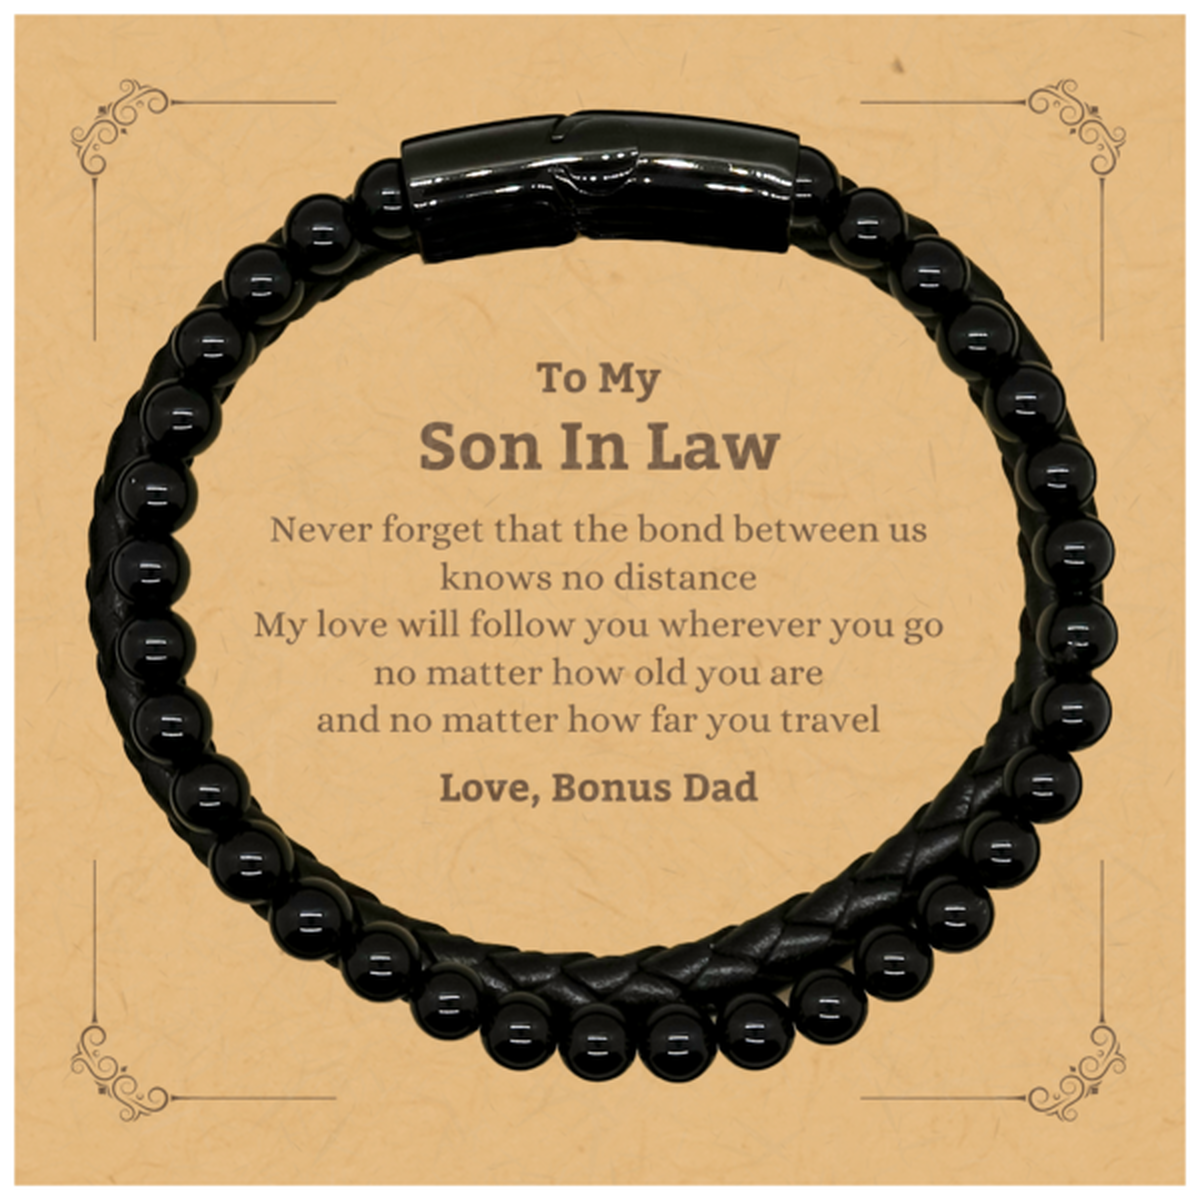 Son In Law Birthday Gifts from Bonus Dad, Adjustable Stone Leather Bracelets for Son In Law Christmas Graduation Unique Gifts Son In Law Never forget that the bond between us knows no distance. Love, Bonus Dad